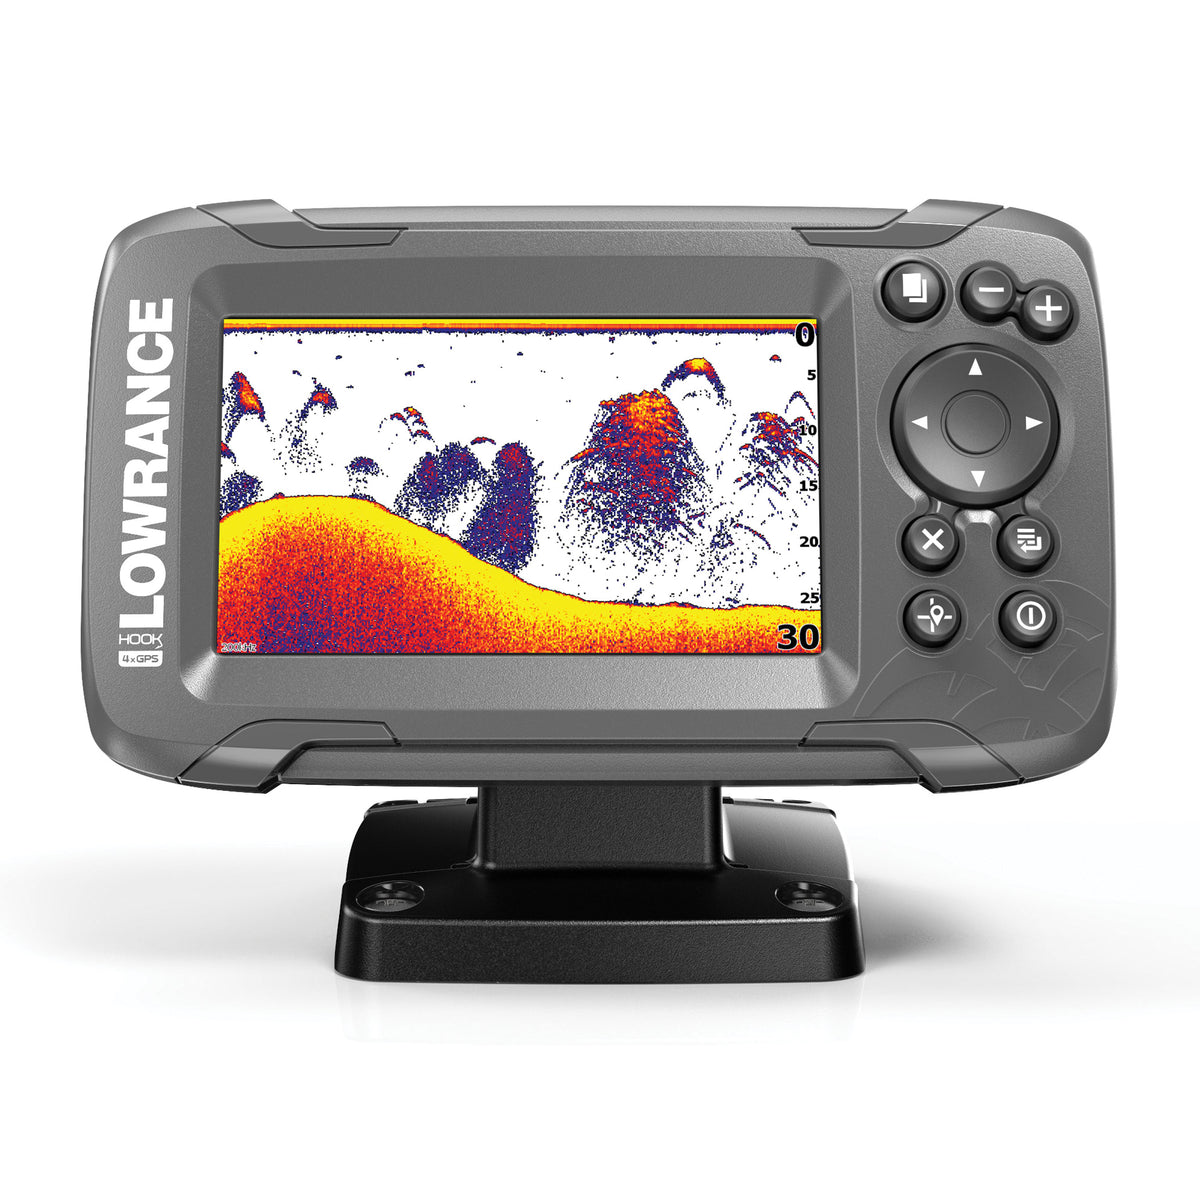 Lowrance 000-14014-001 HOOK2 4x with Bullet Transducer and GPS Plotter